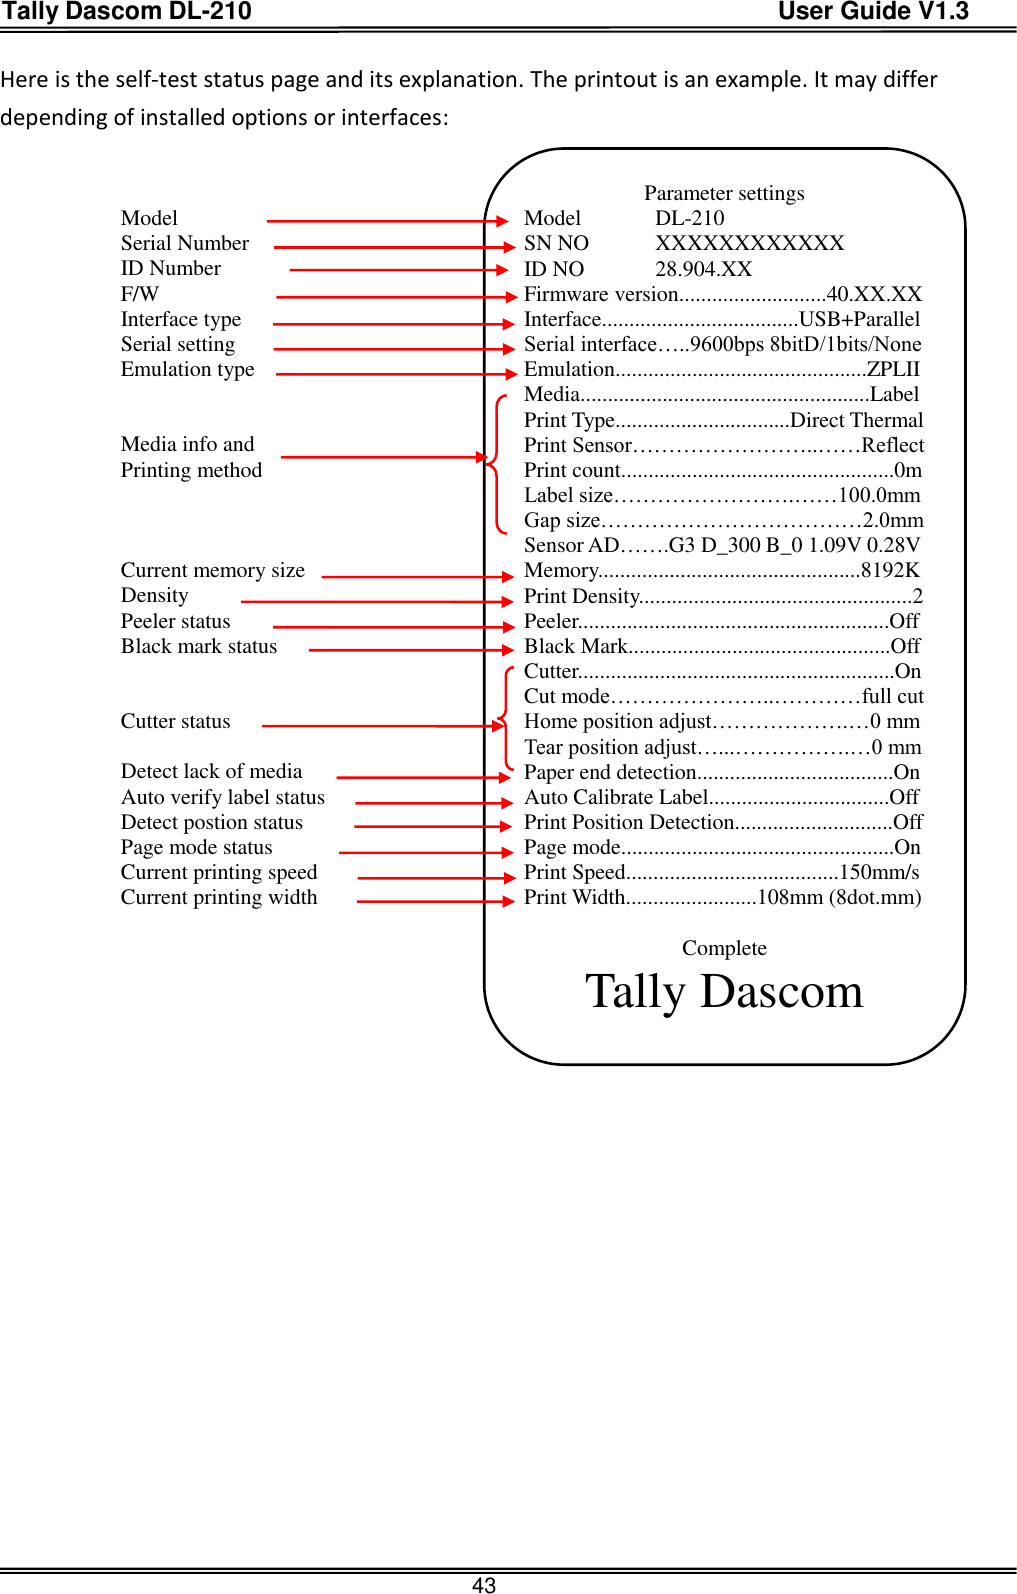 Tally Dascom DL-210                                          User Guide V1.3  43 Here is the self-test status page and its explanation. The printout is an example. It may differ depending of installed options or interfaces:                    Model Serial Number ID Number F/W   Interface type Serial setting Emulation type   Media info and   Printing method    Current memory size Density Peeler status Black mark status   Cutter status  Detect lack of media Auto verify label status Detect postion status Page mode status Current printing speed Current printing width   Parameter settings Model    DL-210 SN NO    XXXXXXXXXXXX ID NO    28.904.XX   Firmware version...........................40.XX.XX Interface....................................USB+Parallel Serial interface…..9600bps 8bitD/1bits/None Emulation..............................................ZPLII Media.....................................................Label Print Type................................Direct Thermal Print Sensor……………………..……Reflect Print count..................................................0m Label size…………………….……100.0mm Gap size………………………………2.0mm Sensor AD…….G3 D_300 B_0 1.09V 0.28V Memory................................................8192K Print Density..................................................2 Peeler.........................................................Off Black Mark................................................Off Cutter..........................................................On Cut mode…………………..…………full cut Home position adjust……………….…0 mm Tear position adjust…...…………….…0 mm Paper end detection....................................On Auto Calibrate Label.................................Off Print Position Detection.............................Off Page mode..................................................On Print Speed.......................................150mm/s Print Width........................108mm (8dot.mm)  Complete Tally Dascom 